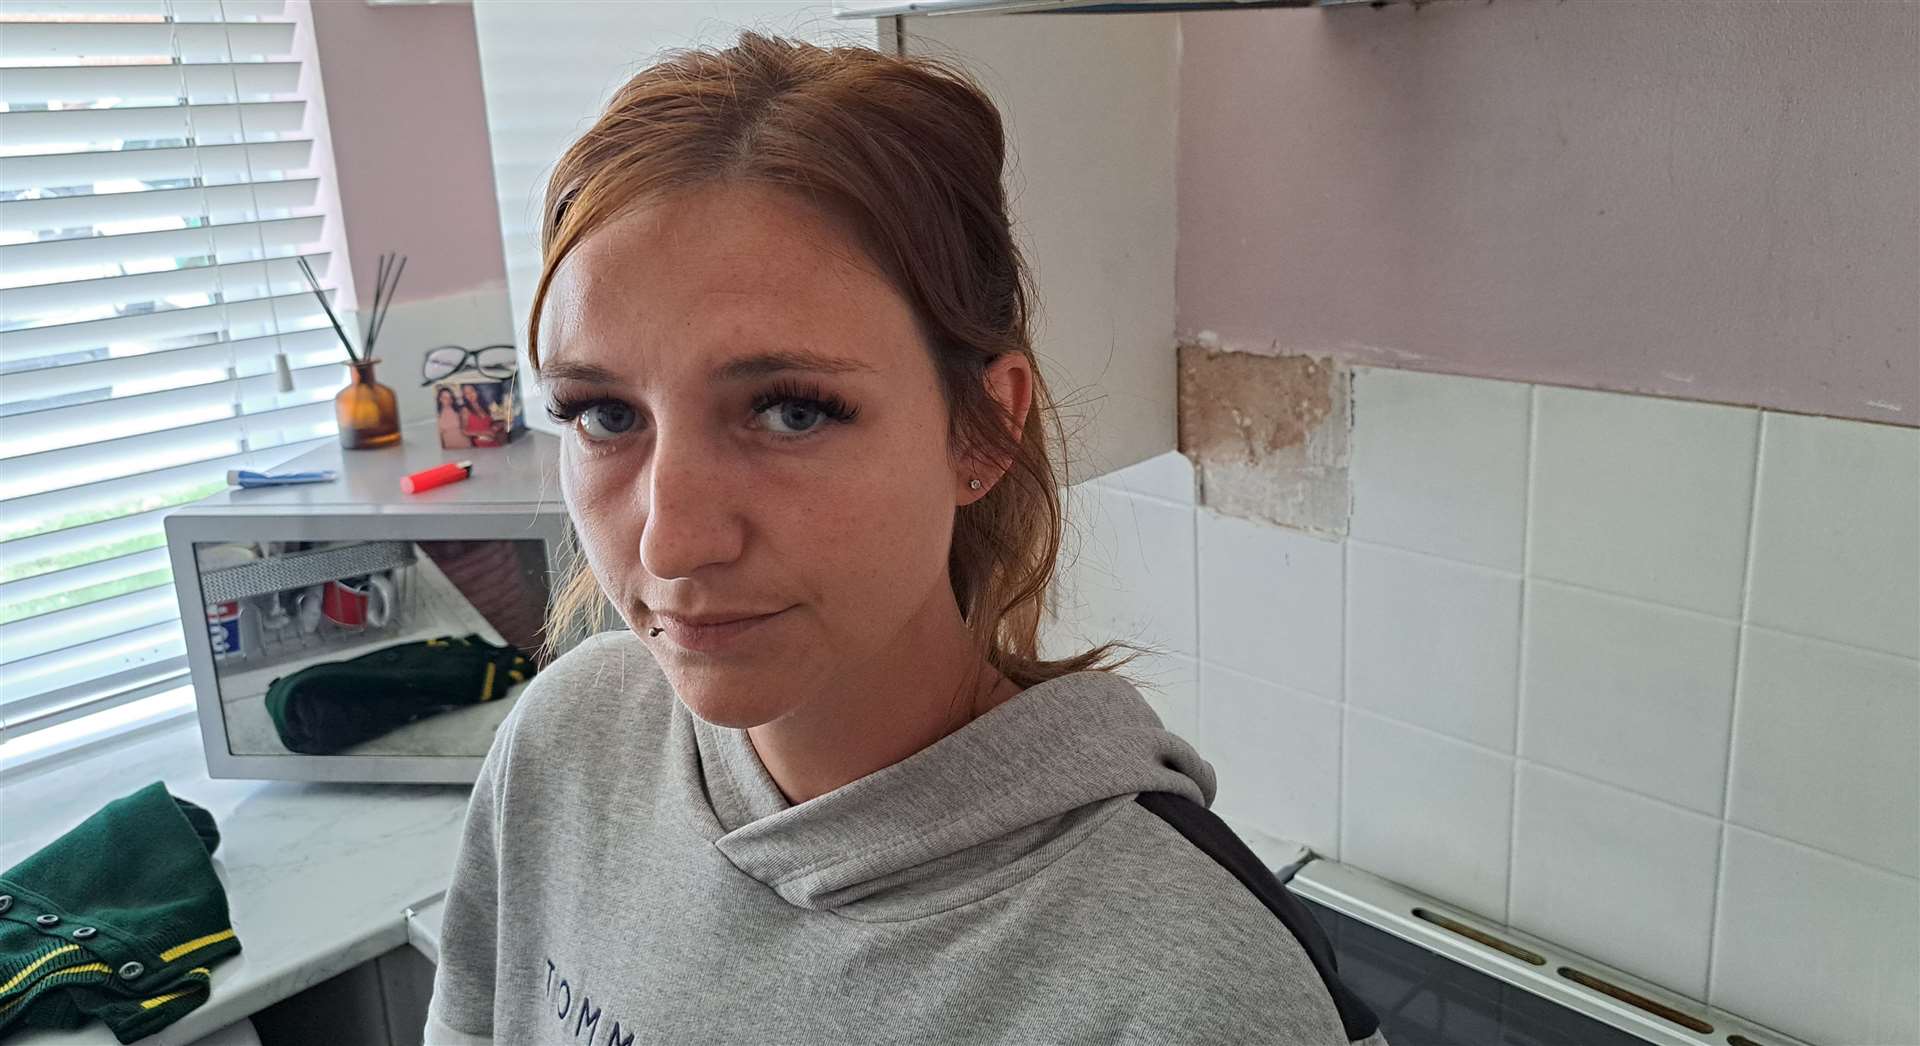 Stacey Cosier has welcomed the news of the review after issues with damp in her home in Smarden